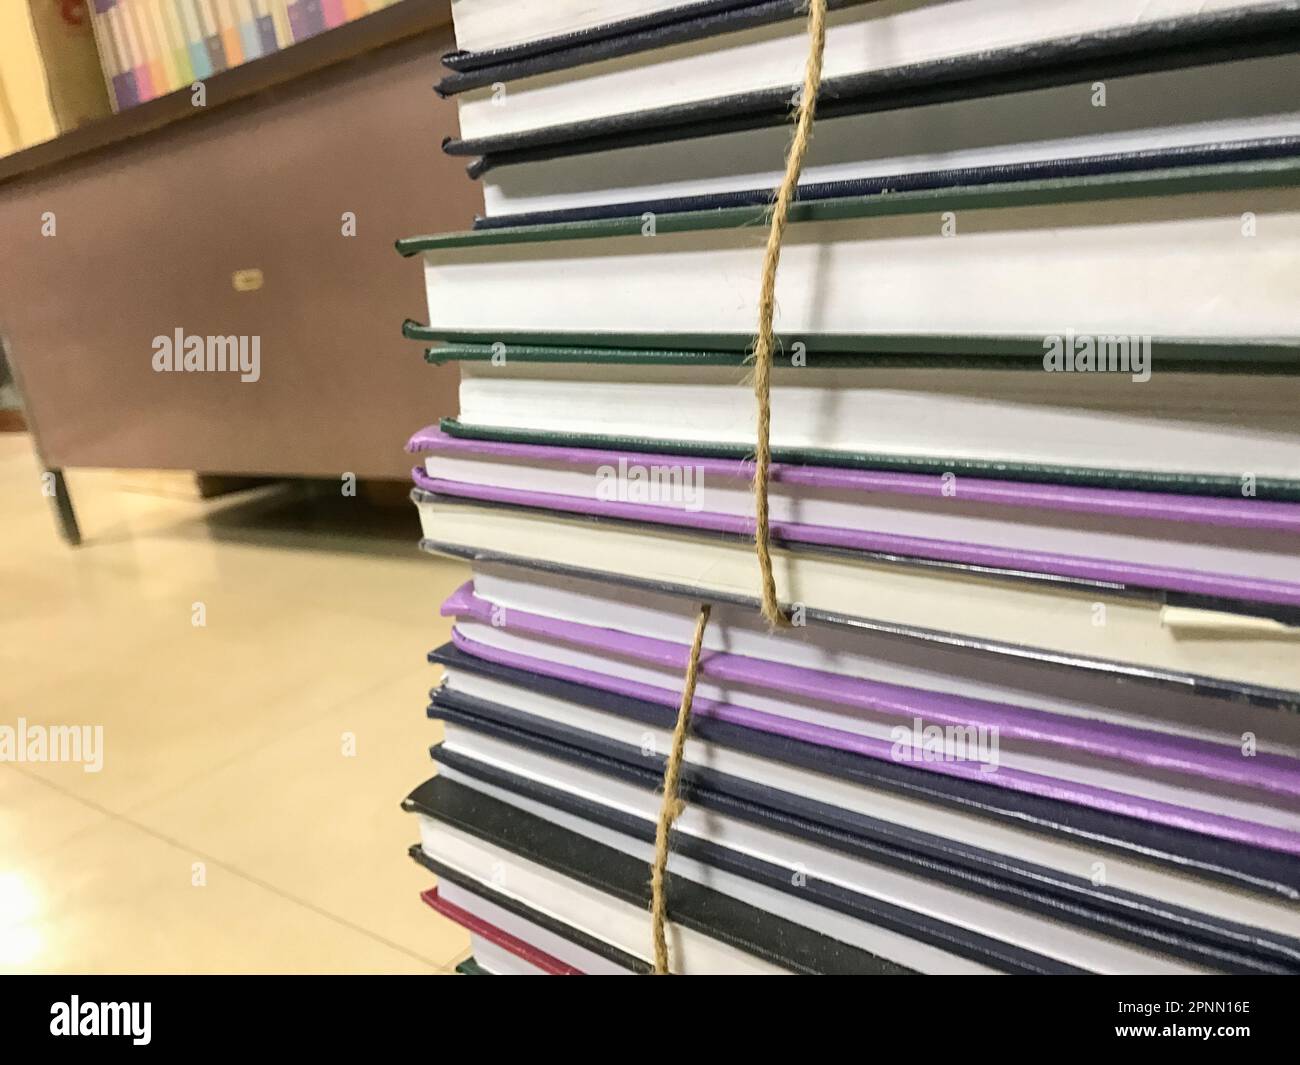 Pile of old books with rope background Stock Photo